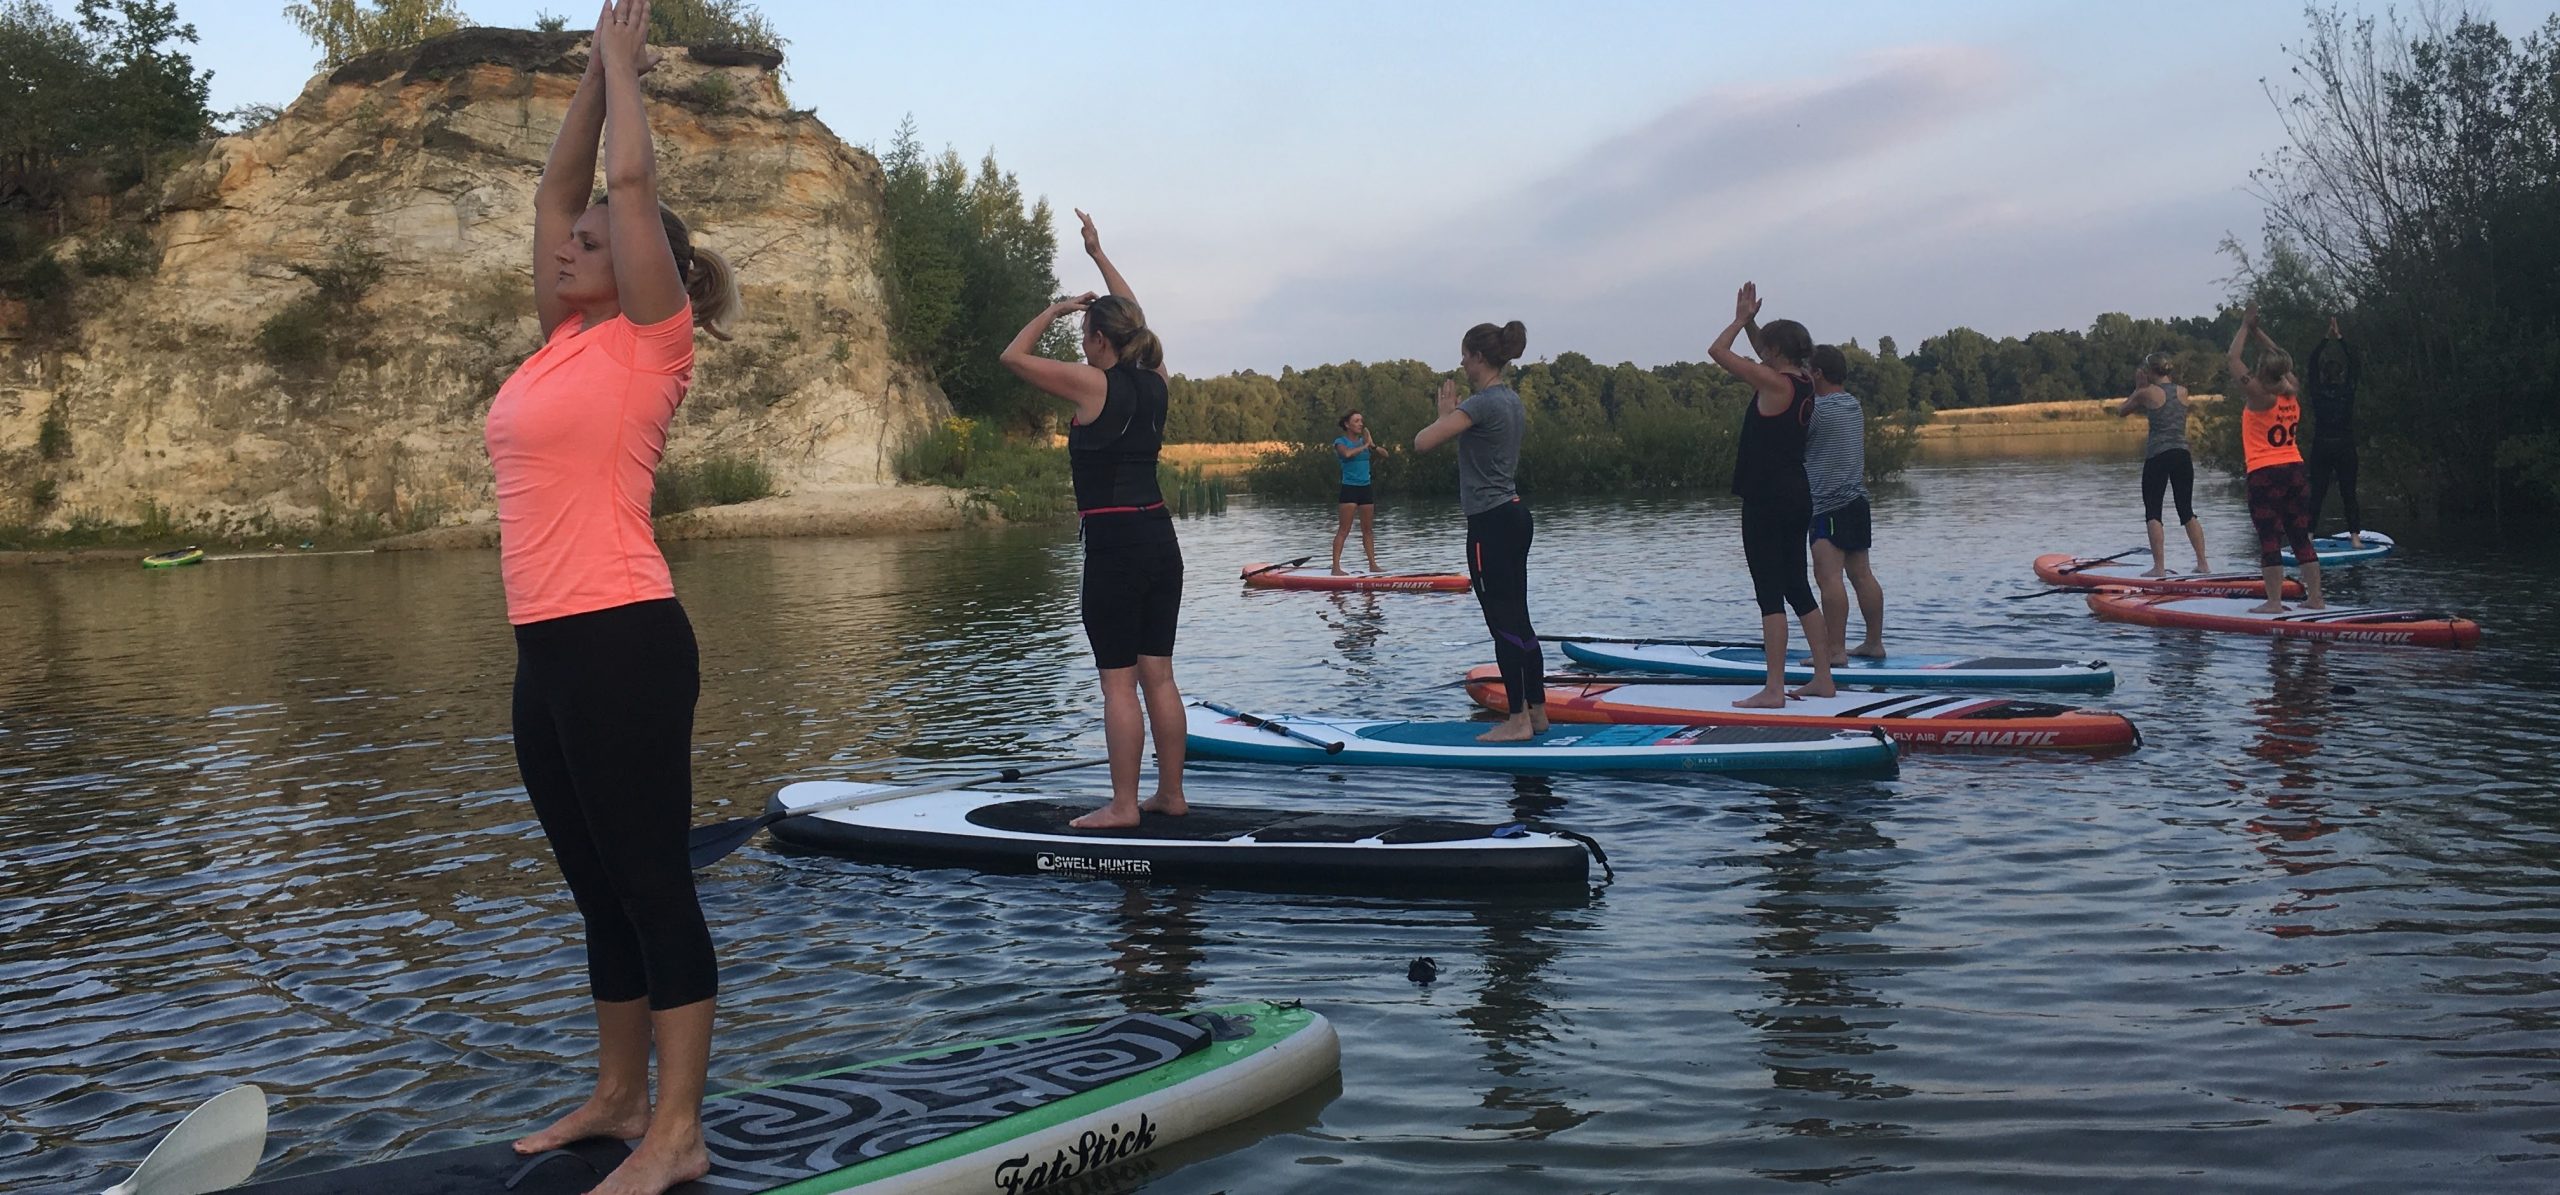 SHAC Buckland SUP yoga group standing with arms above head on paddleboards